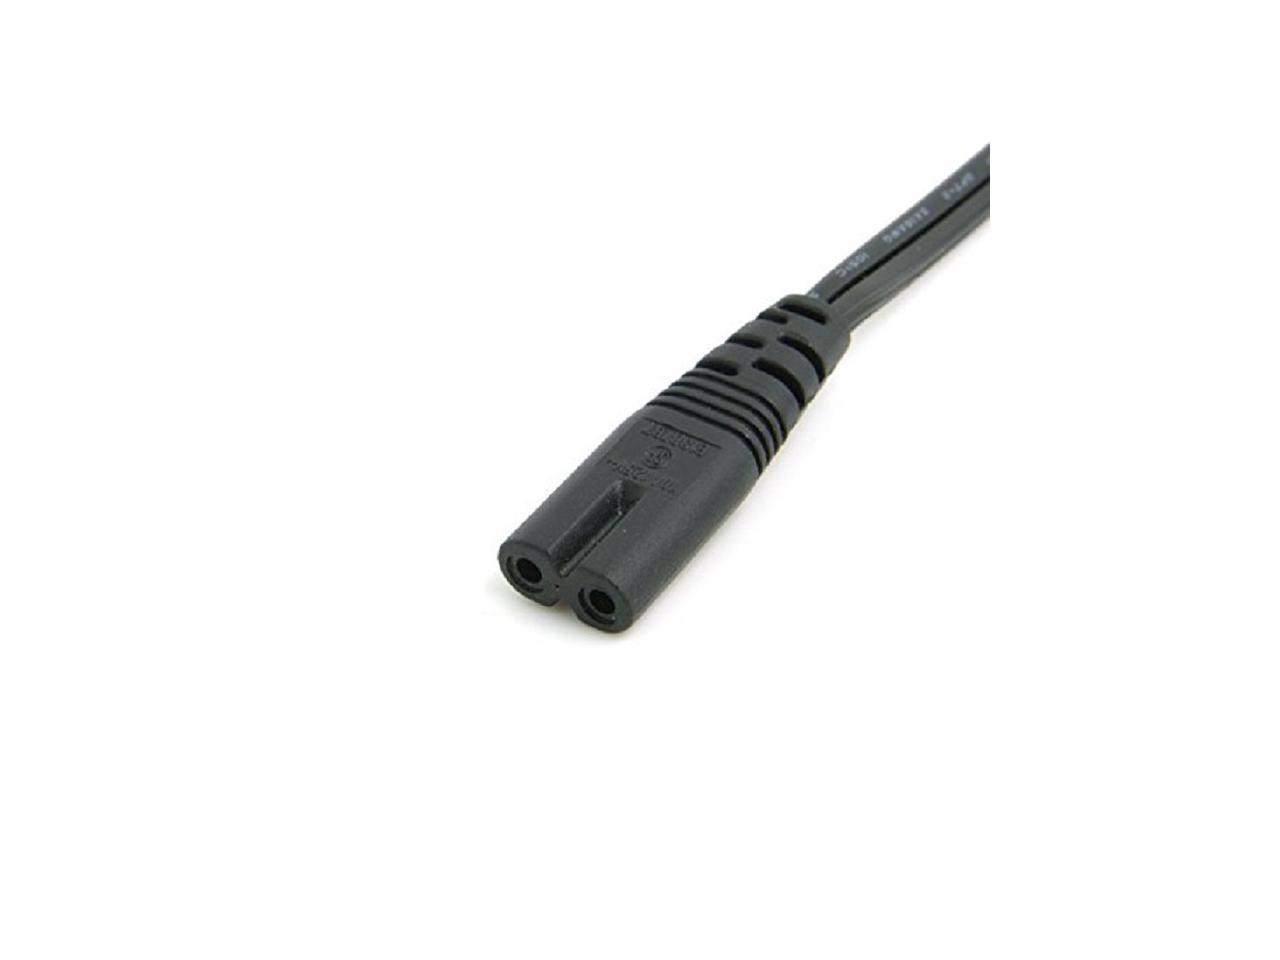 Cablecc IEC 60320 C8 Plug to C7 Receptacle Male to Female Extension Power Supply Main Adapter Cable 30cm